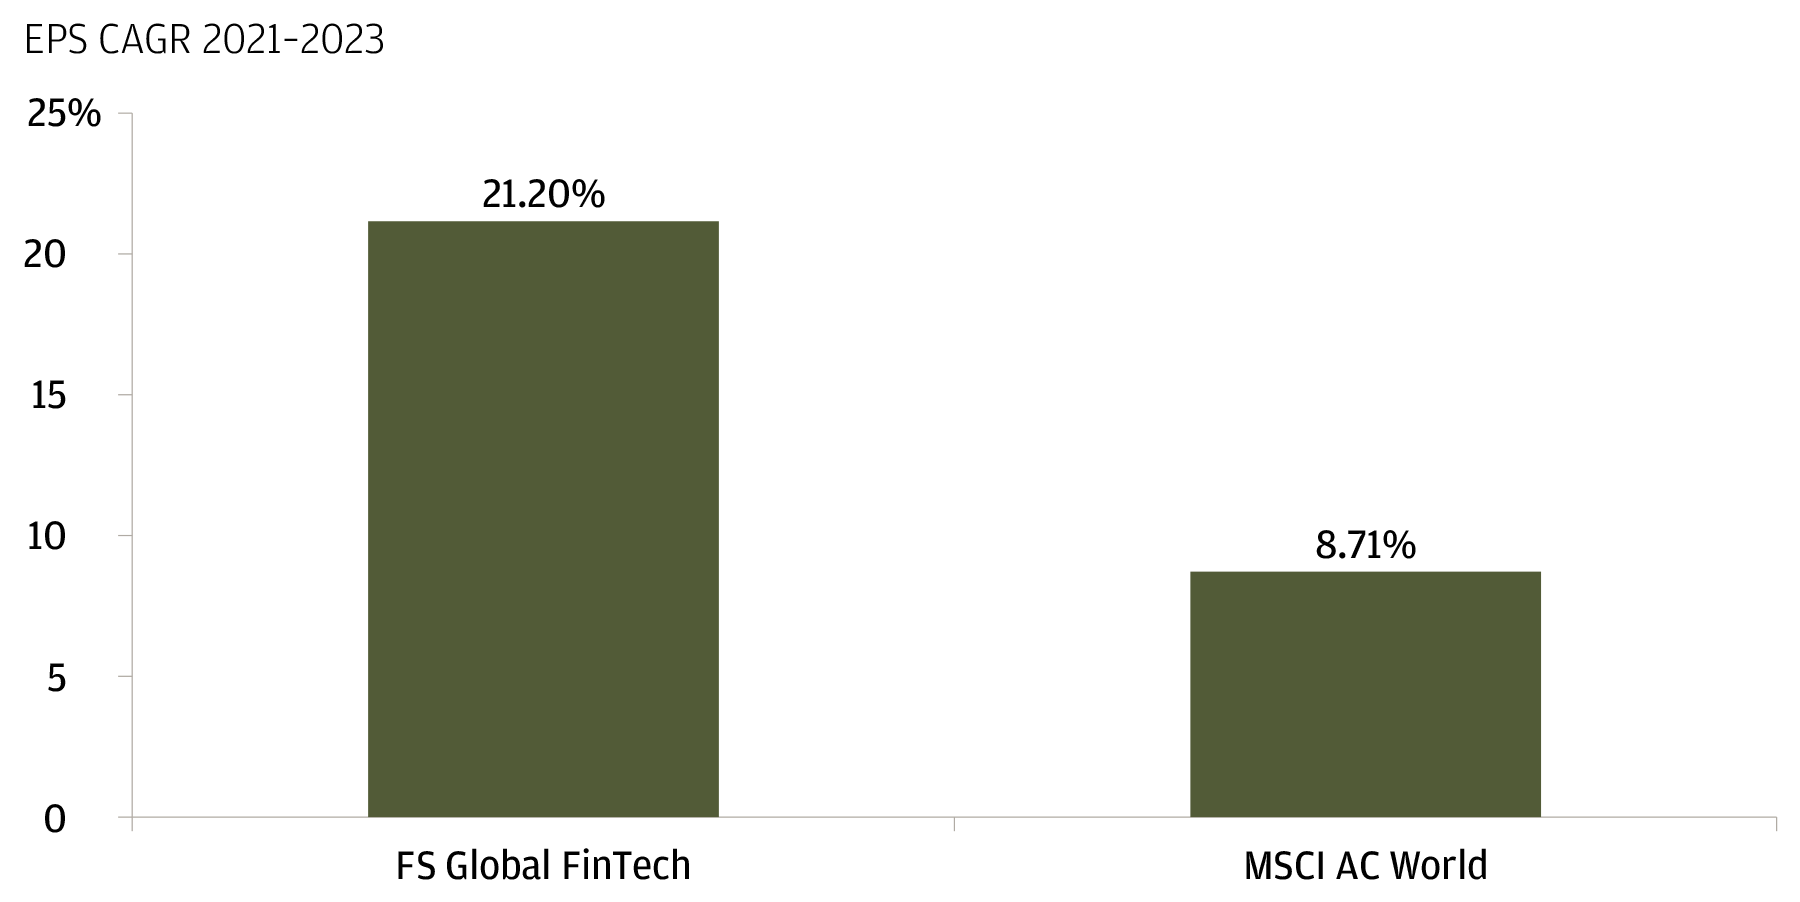 The bar chart shows the projected EPS CAGR from 2021 to 2023 for FS Global Fintech versus the MSCI AC World. It shows that the Fintech sector is projected to significantly outperform the broader index in this time period, at 21.2% and 8.71%, respectively.